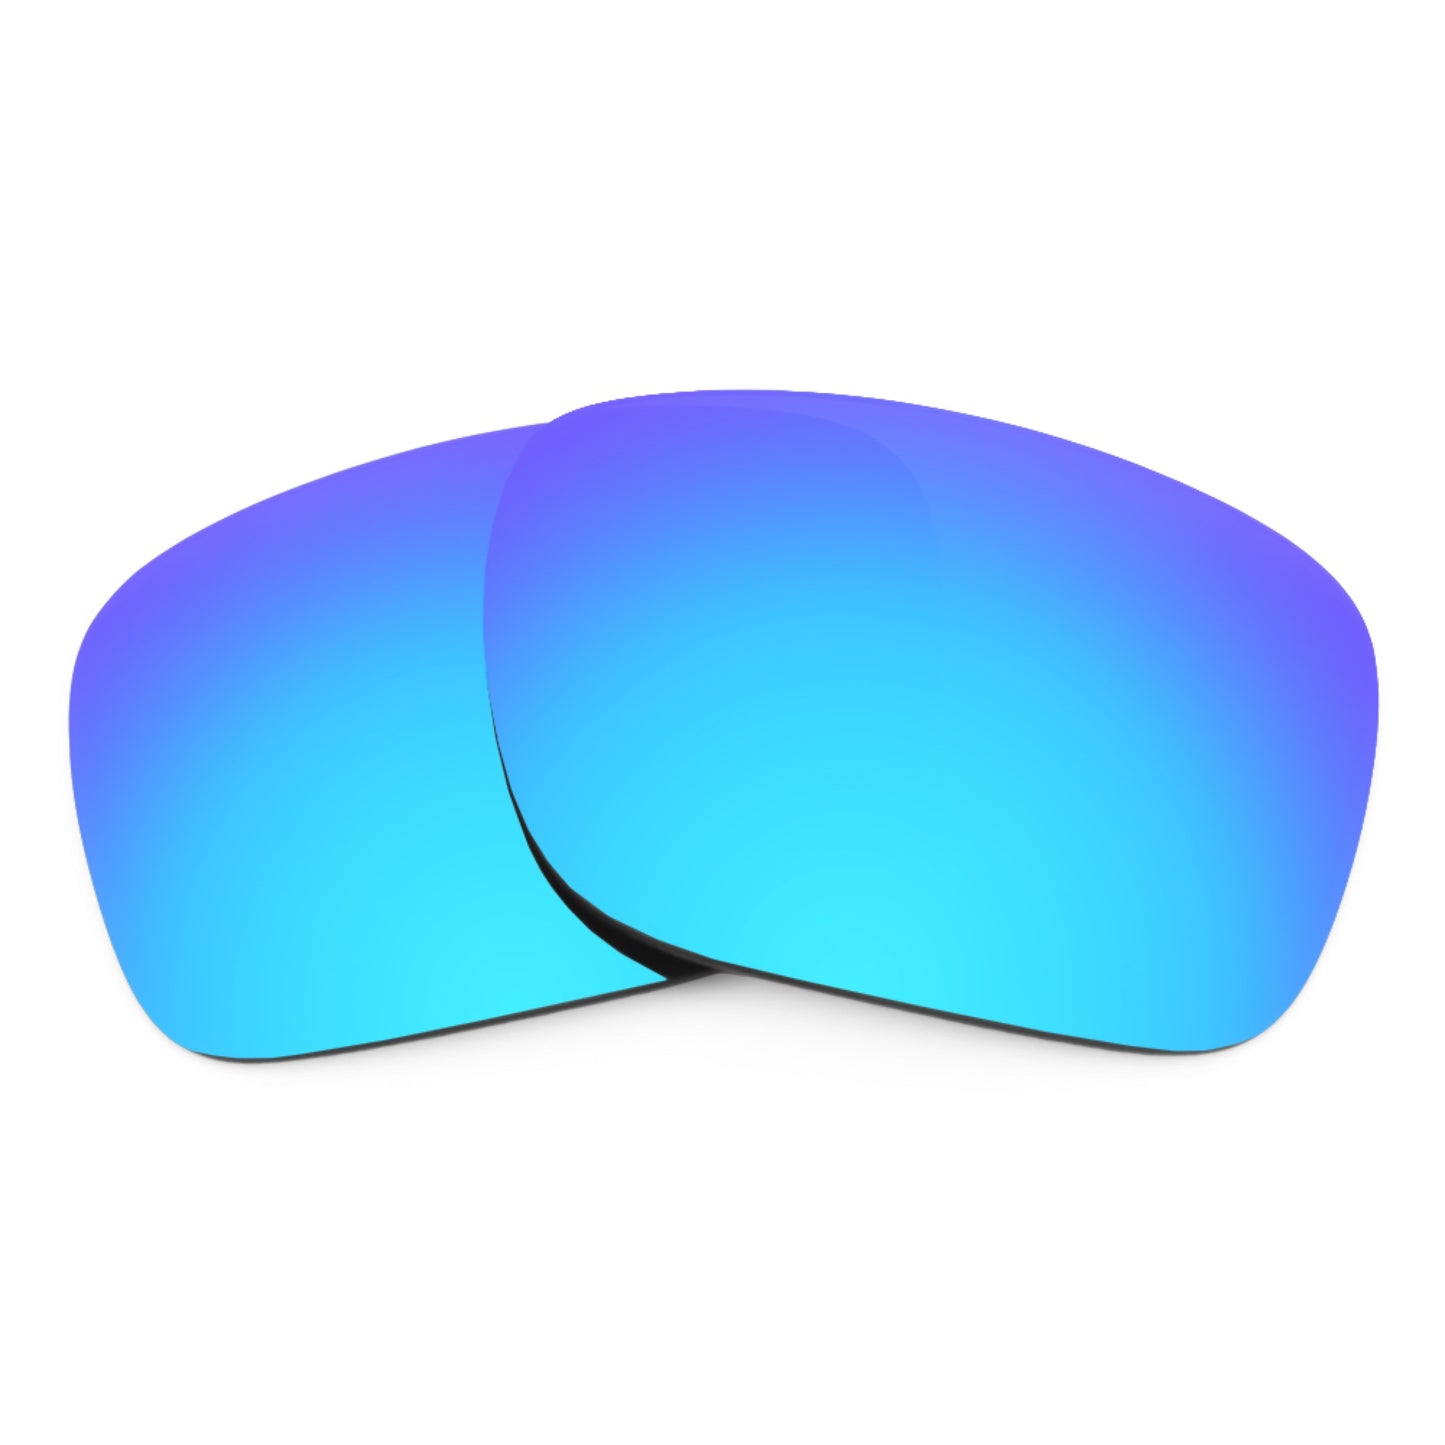 Revant replacement lenses for Ray-Ban RB3522 64mm Non-Polarized Ice Blue